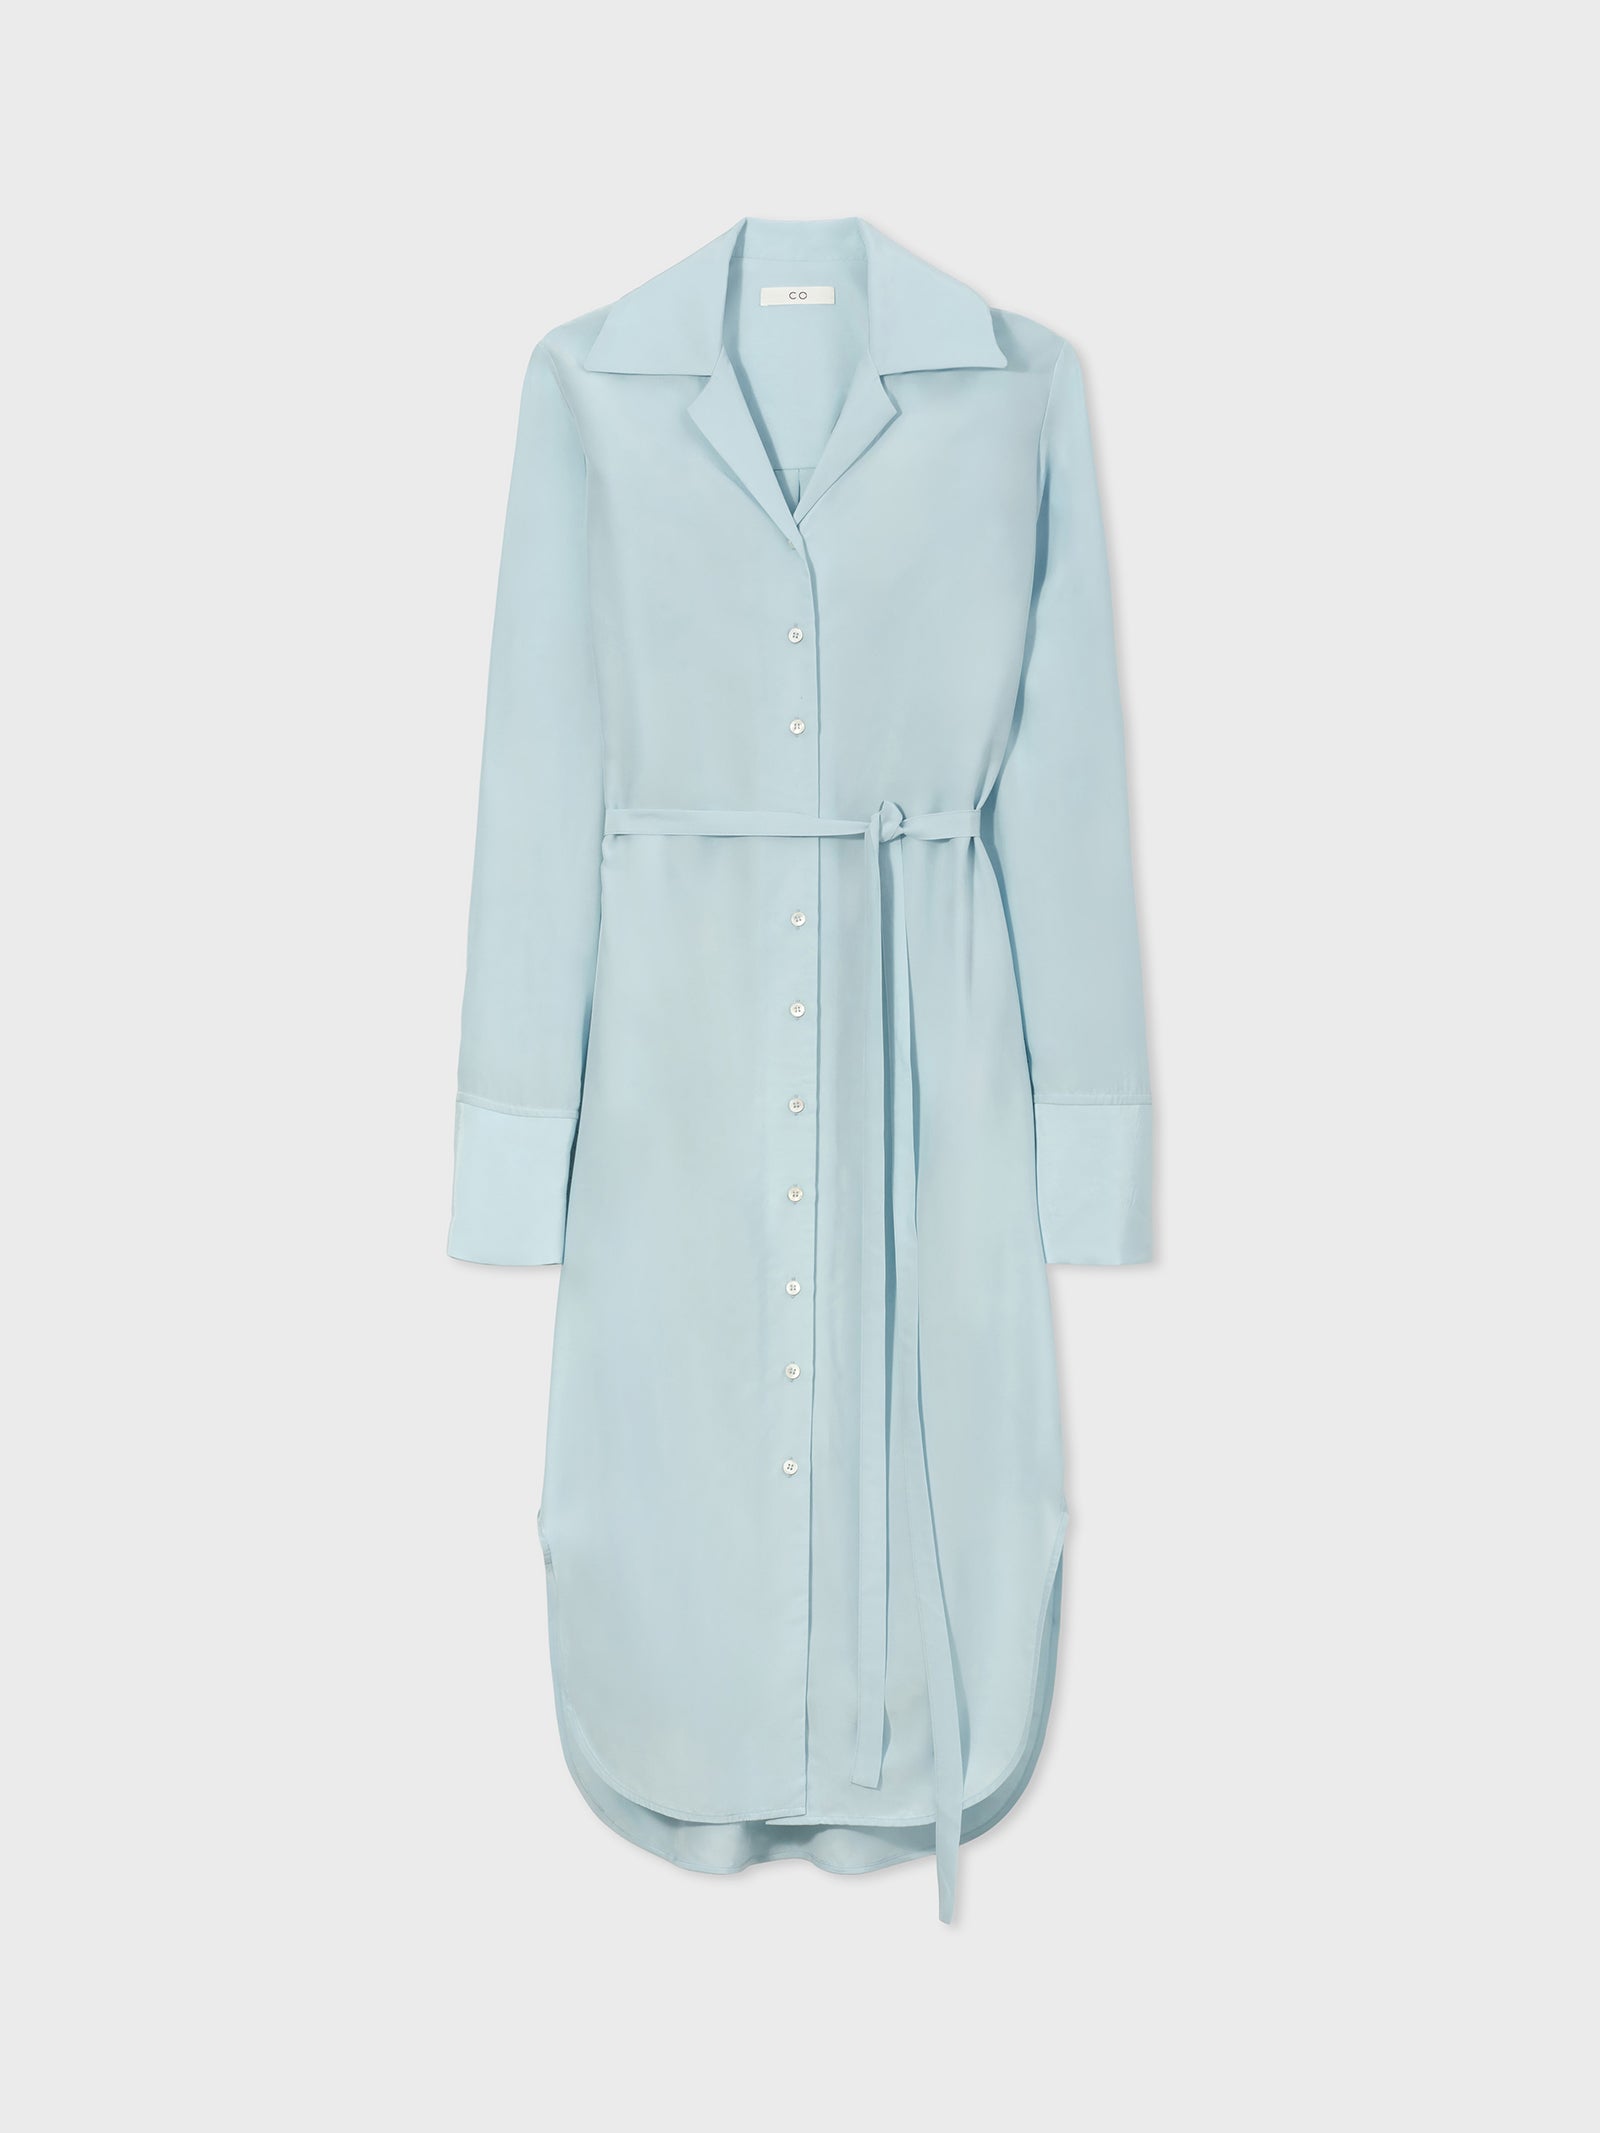 Fluid Shirtdress in Viscose Habotai - Light Blue - CO Collections